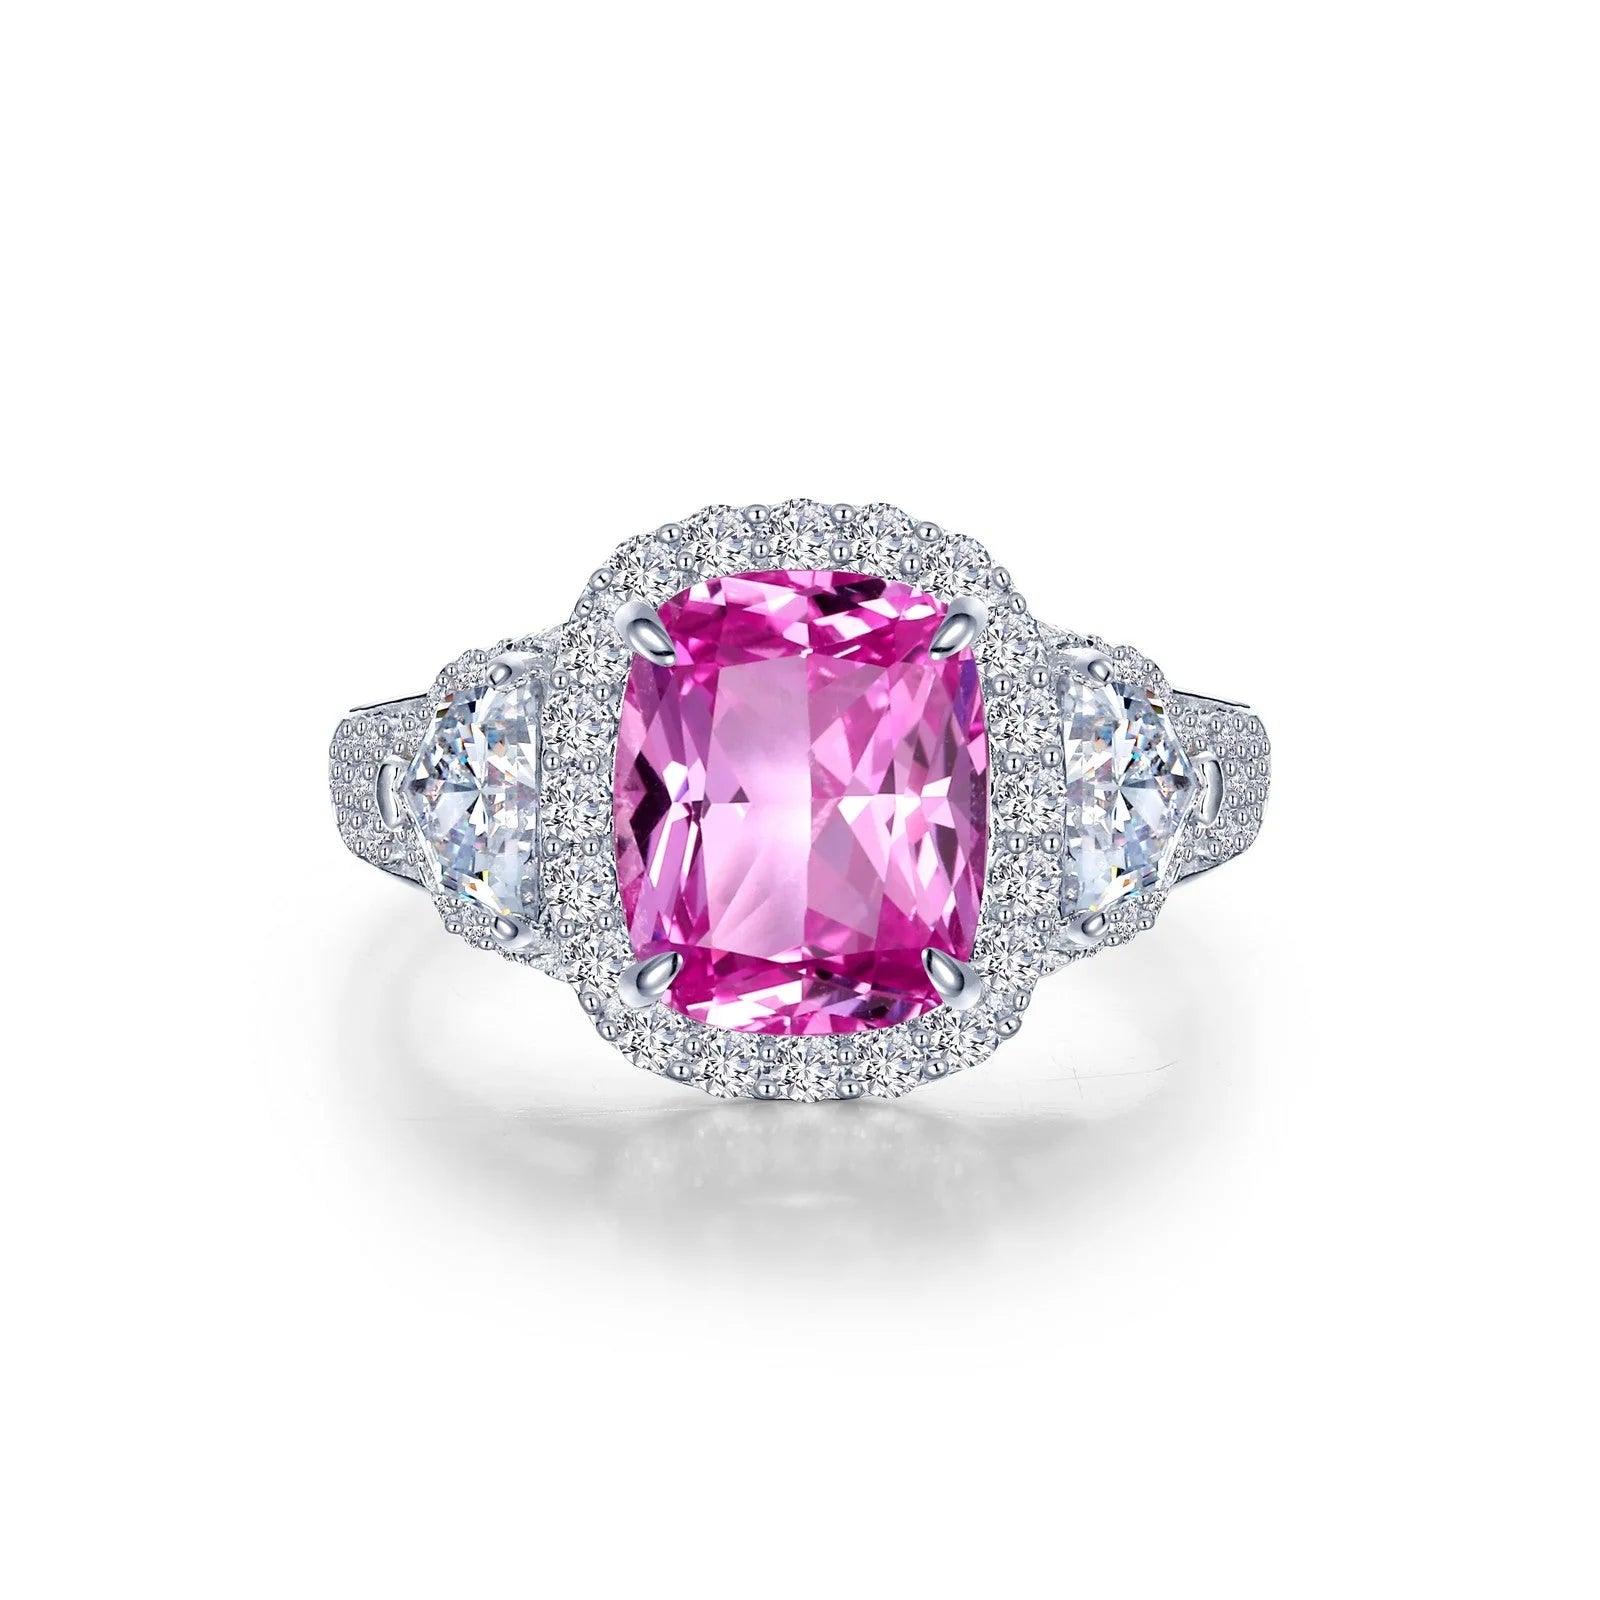 Fancy Lab-Grown Pink Sapphire Ring